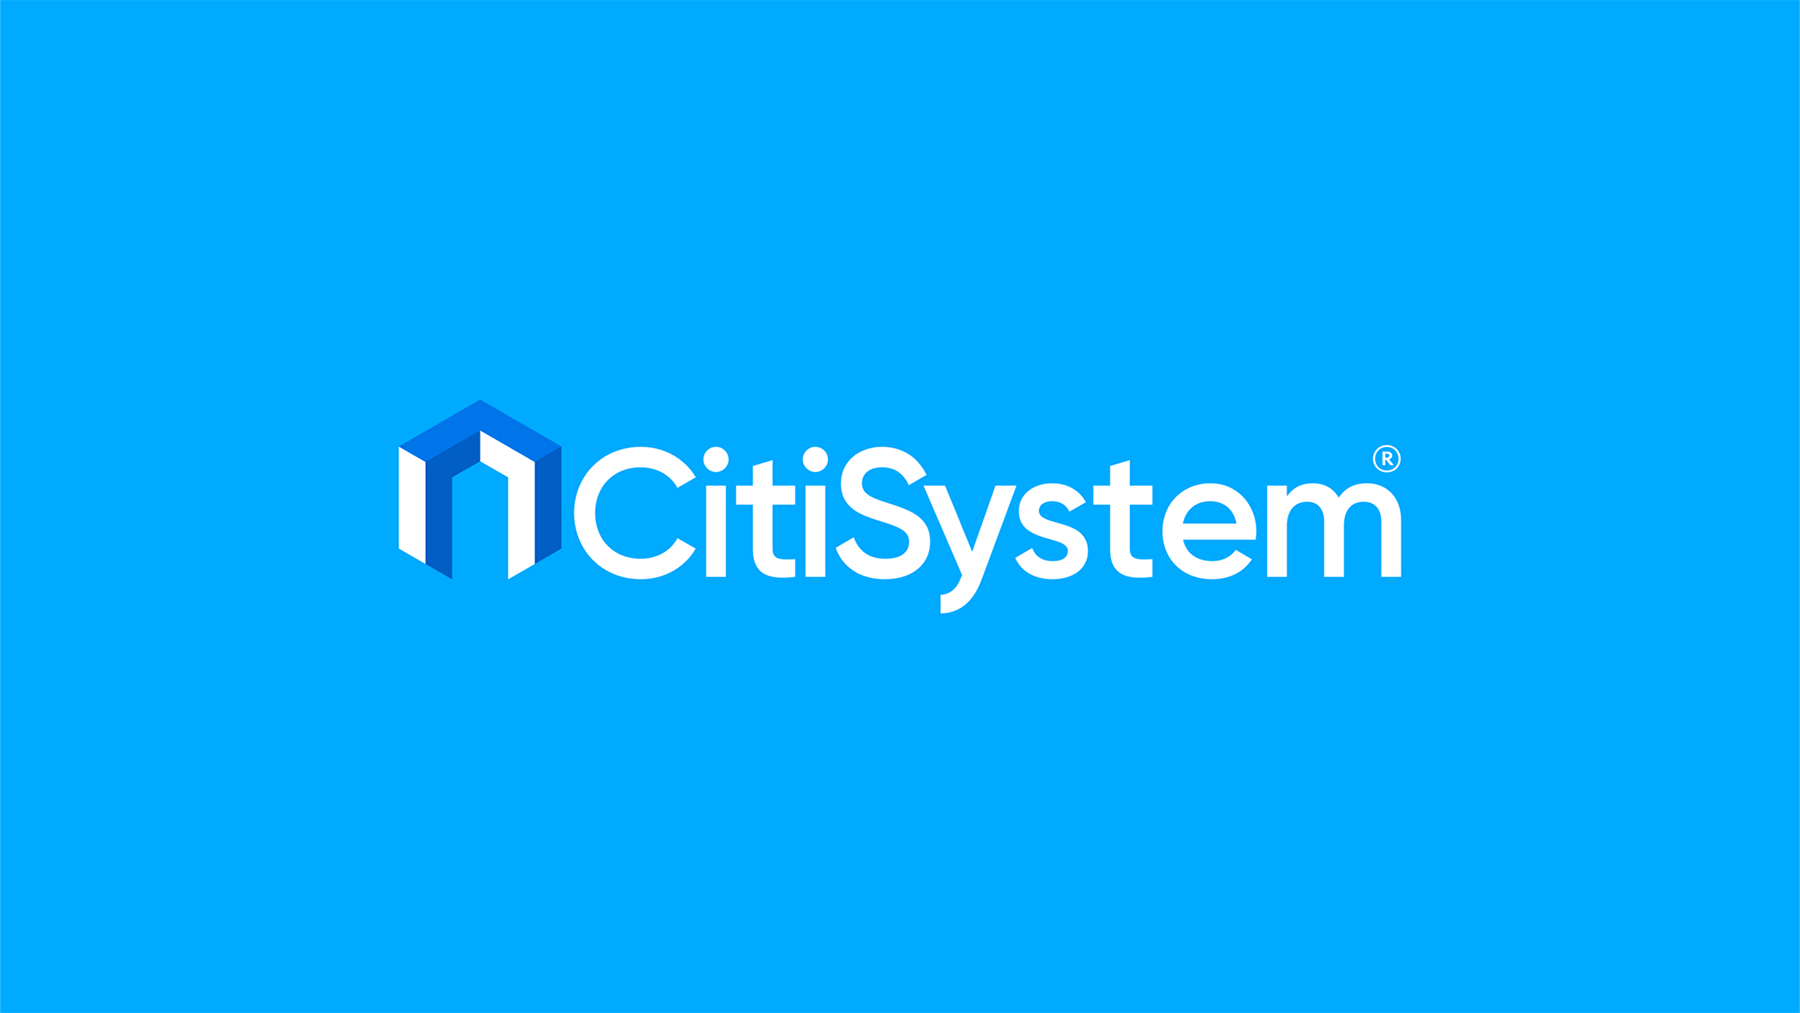 Final Citi System brand design over a solid blue background.